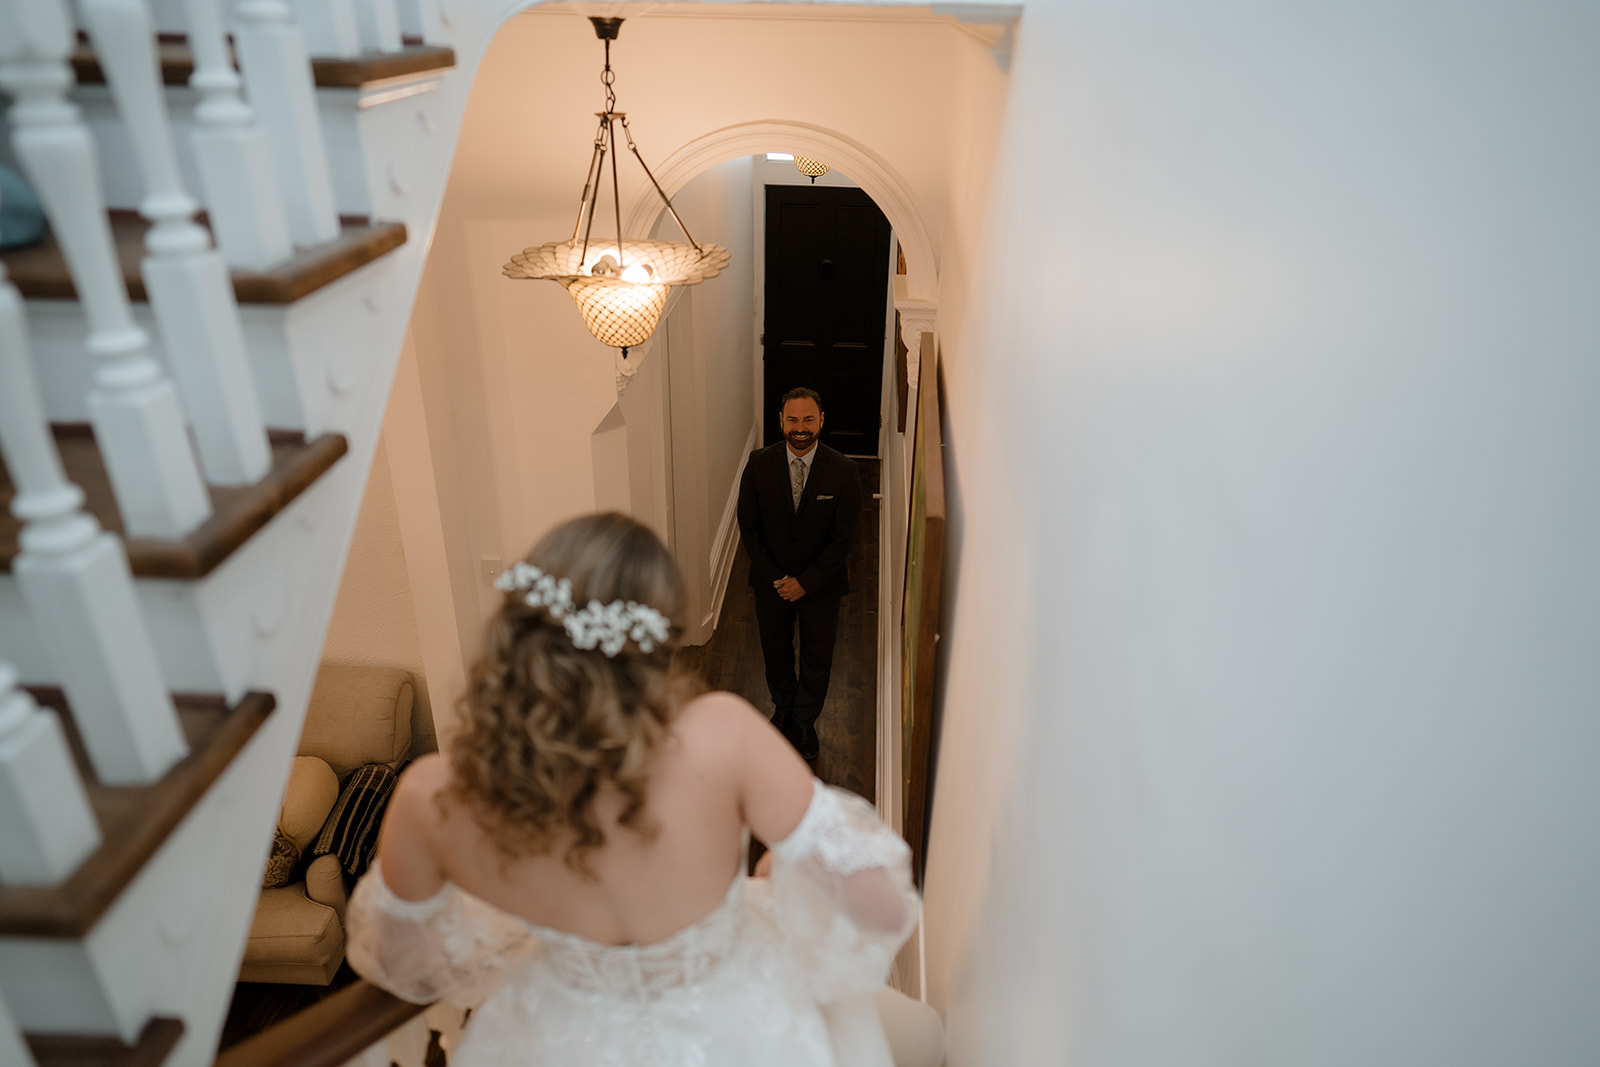 Bride showcases elegant wedding dress to tearful father before heading out to Montsalvat wedding venue